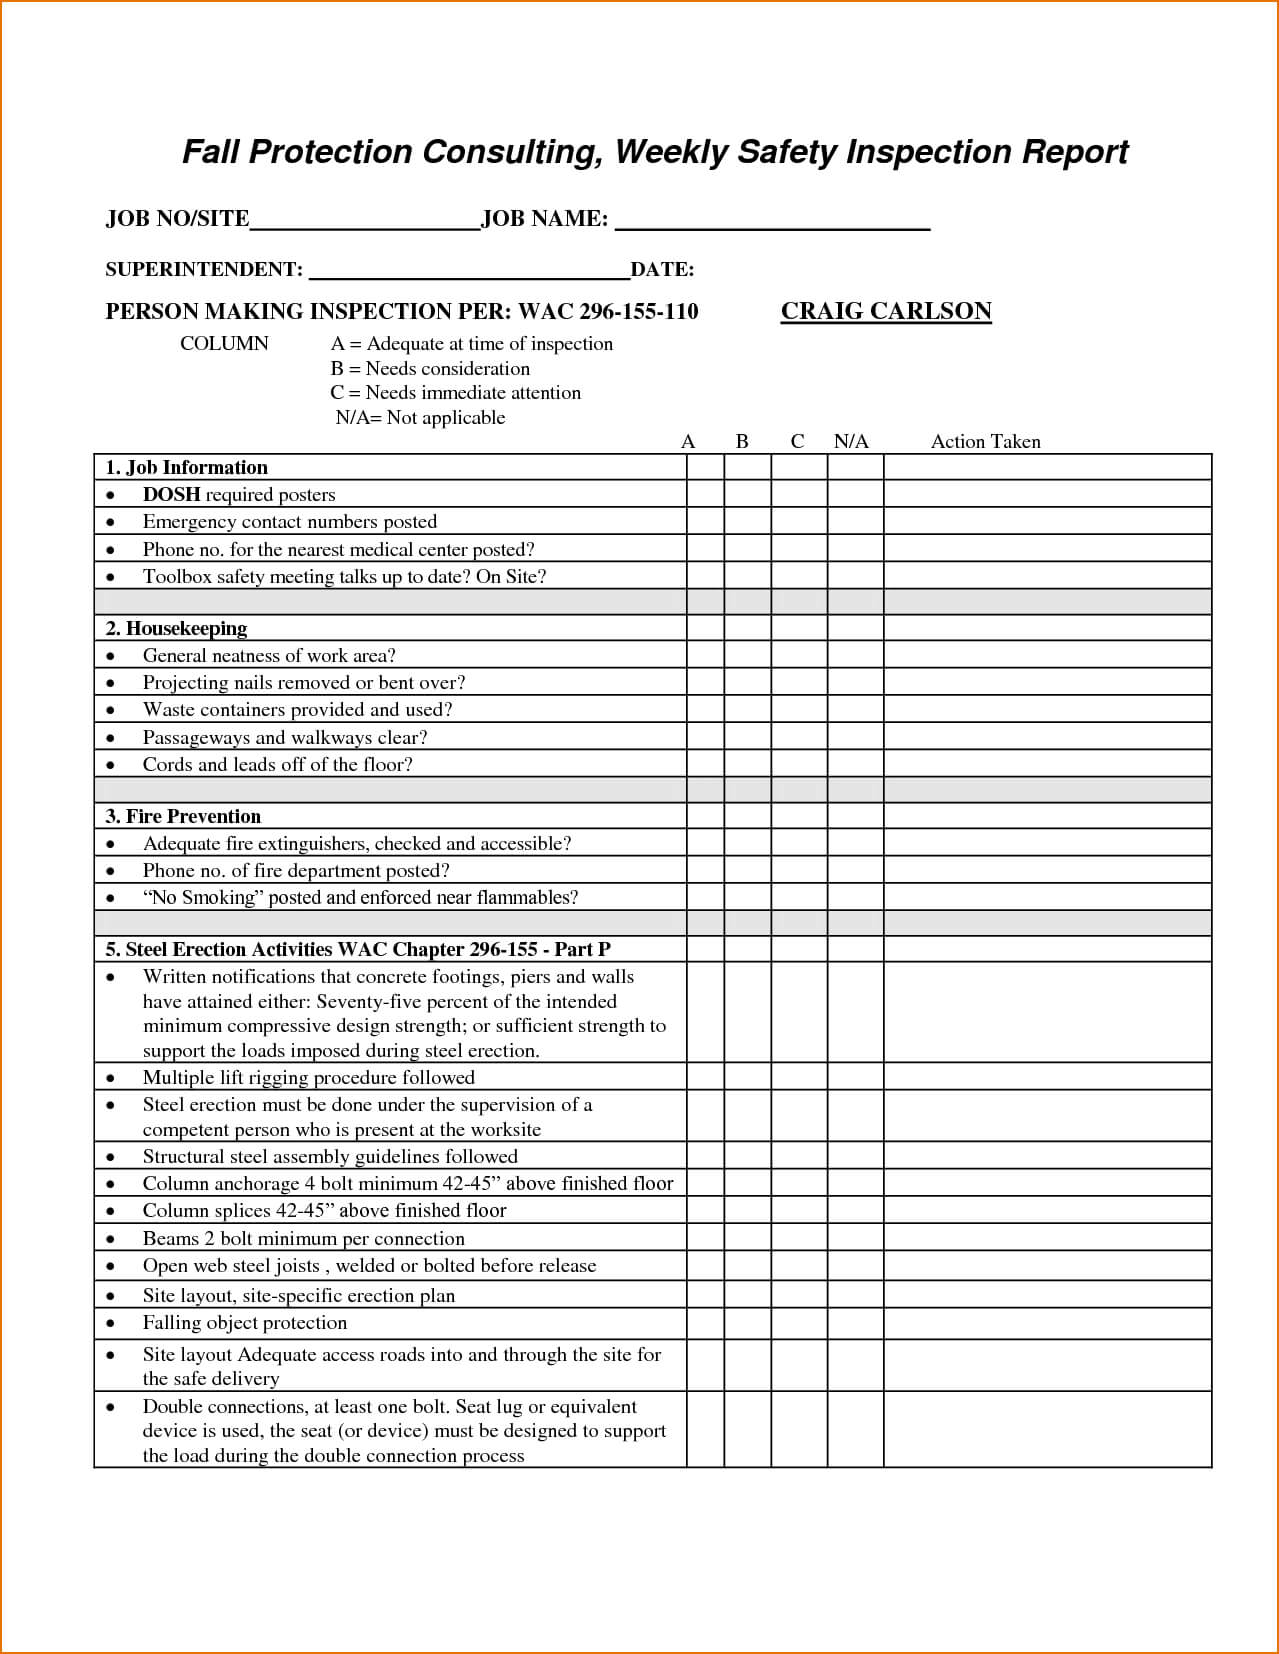 Annual Vehicle Inspection Report Template And Vehicle Safety Intended For Vehicle Inspection Report Template